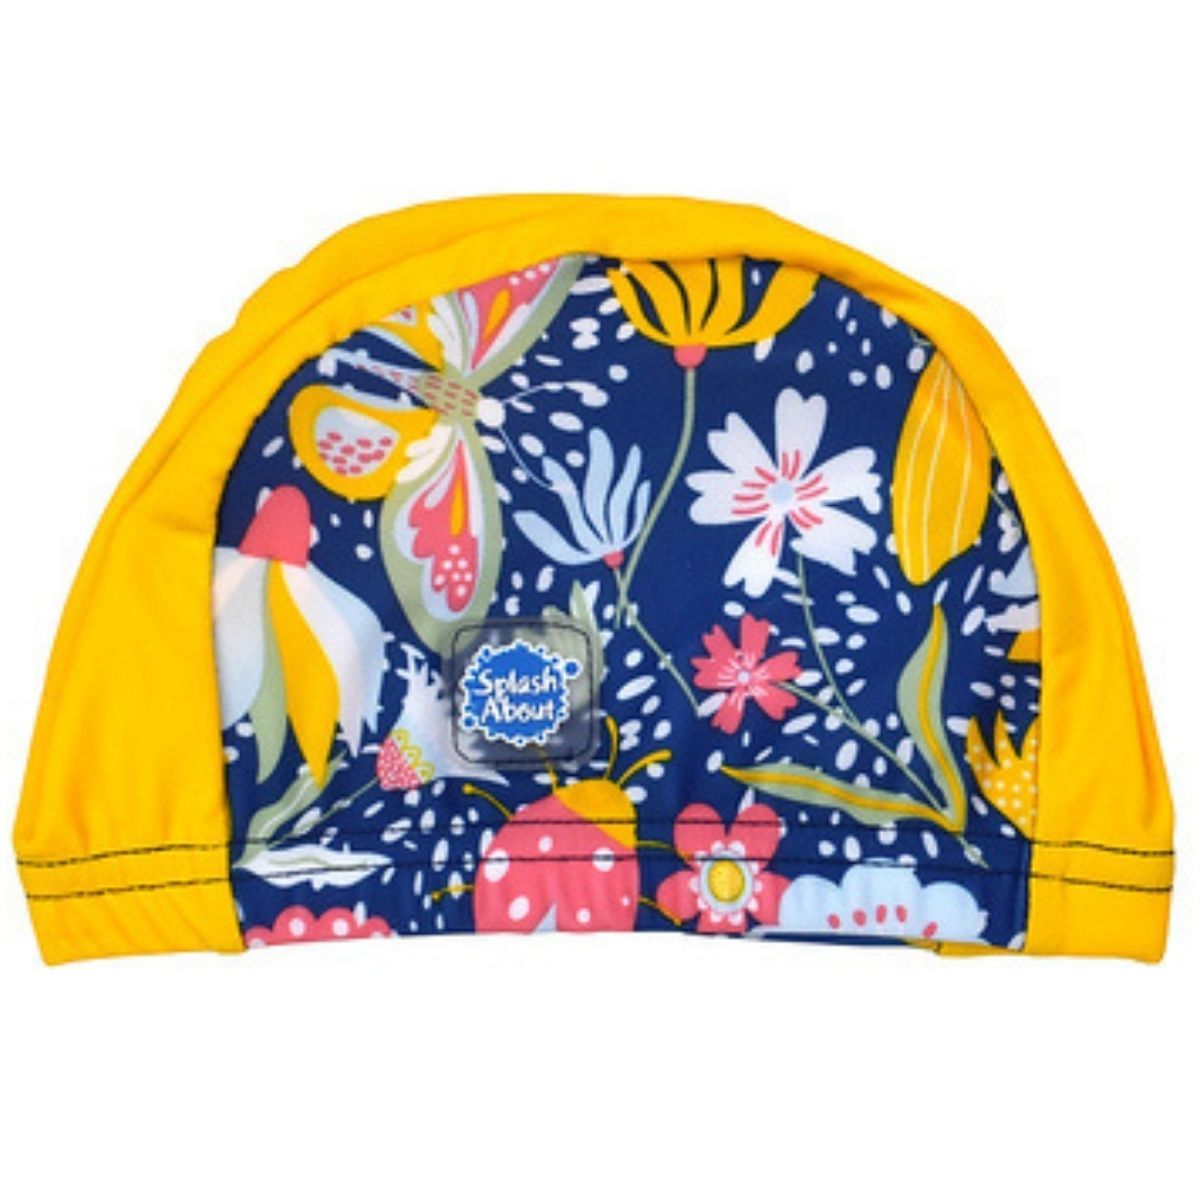 Cute baby swim hat in navy blue with yellow trims and floral print.